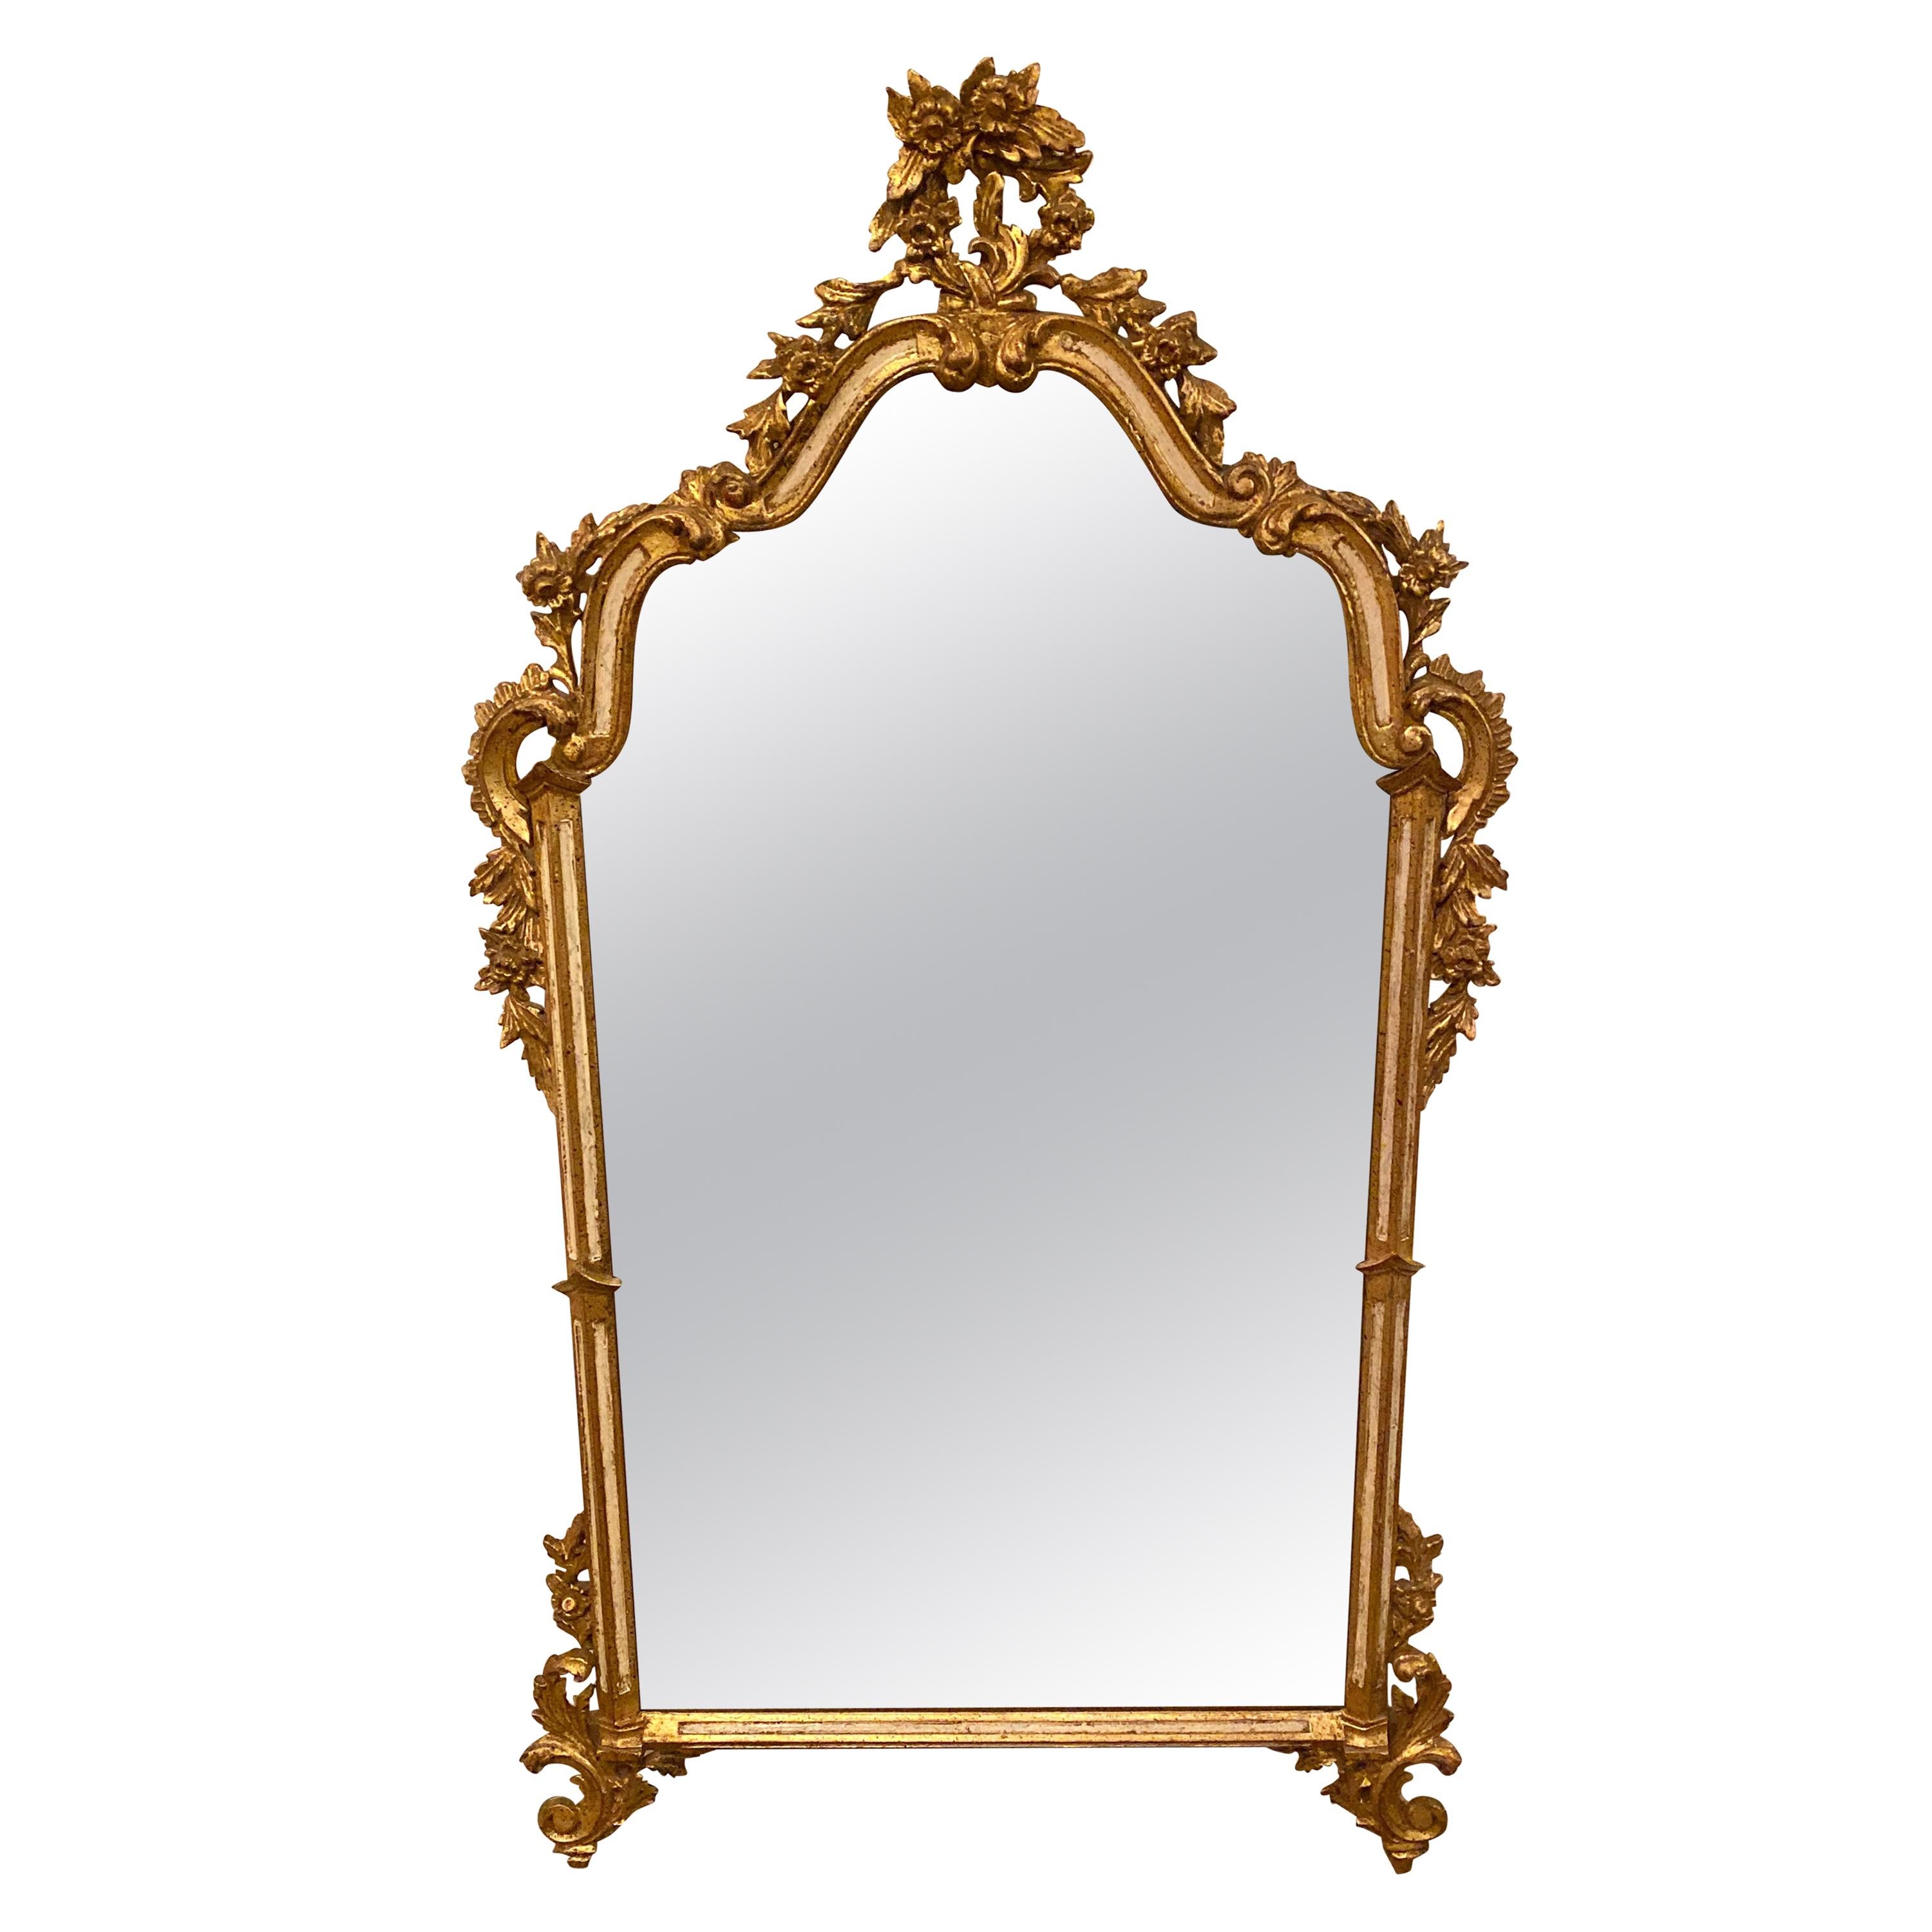 Hollywood Regency Style Painted and Parcel-Gilt Carved Wood Wall Mirror, Italy